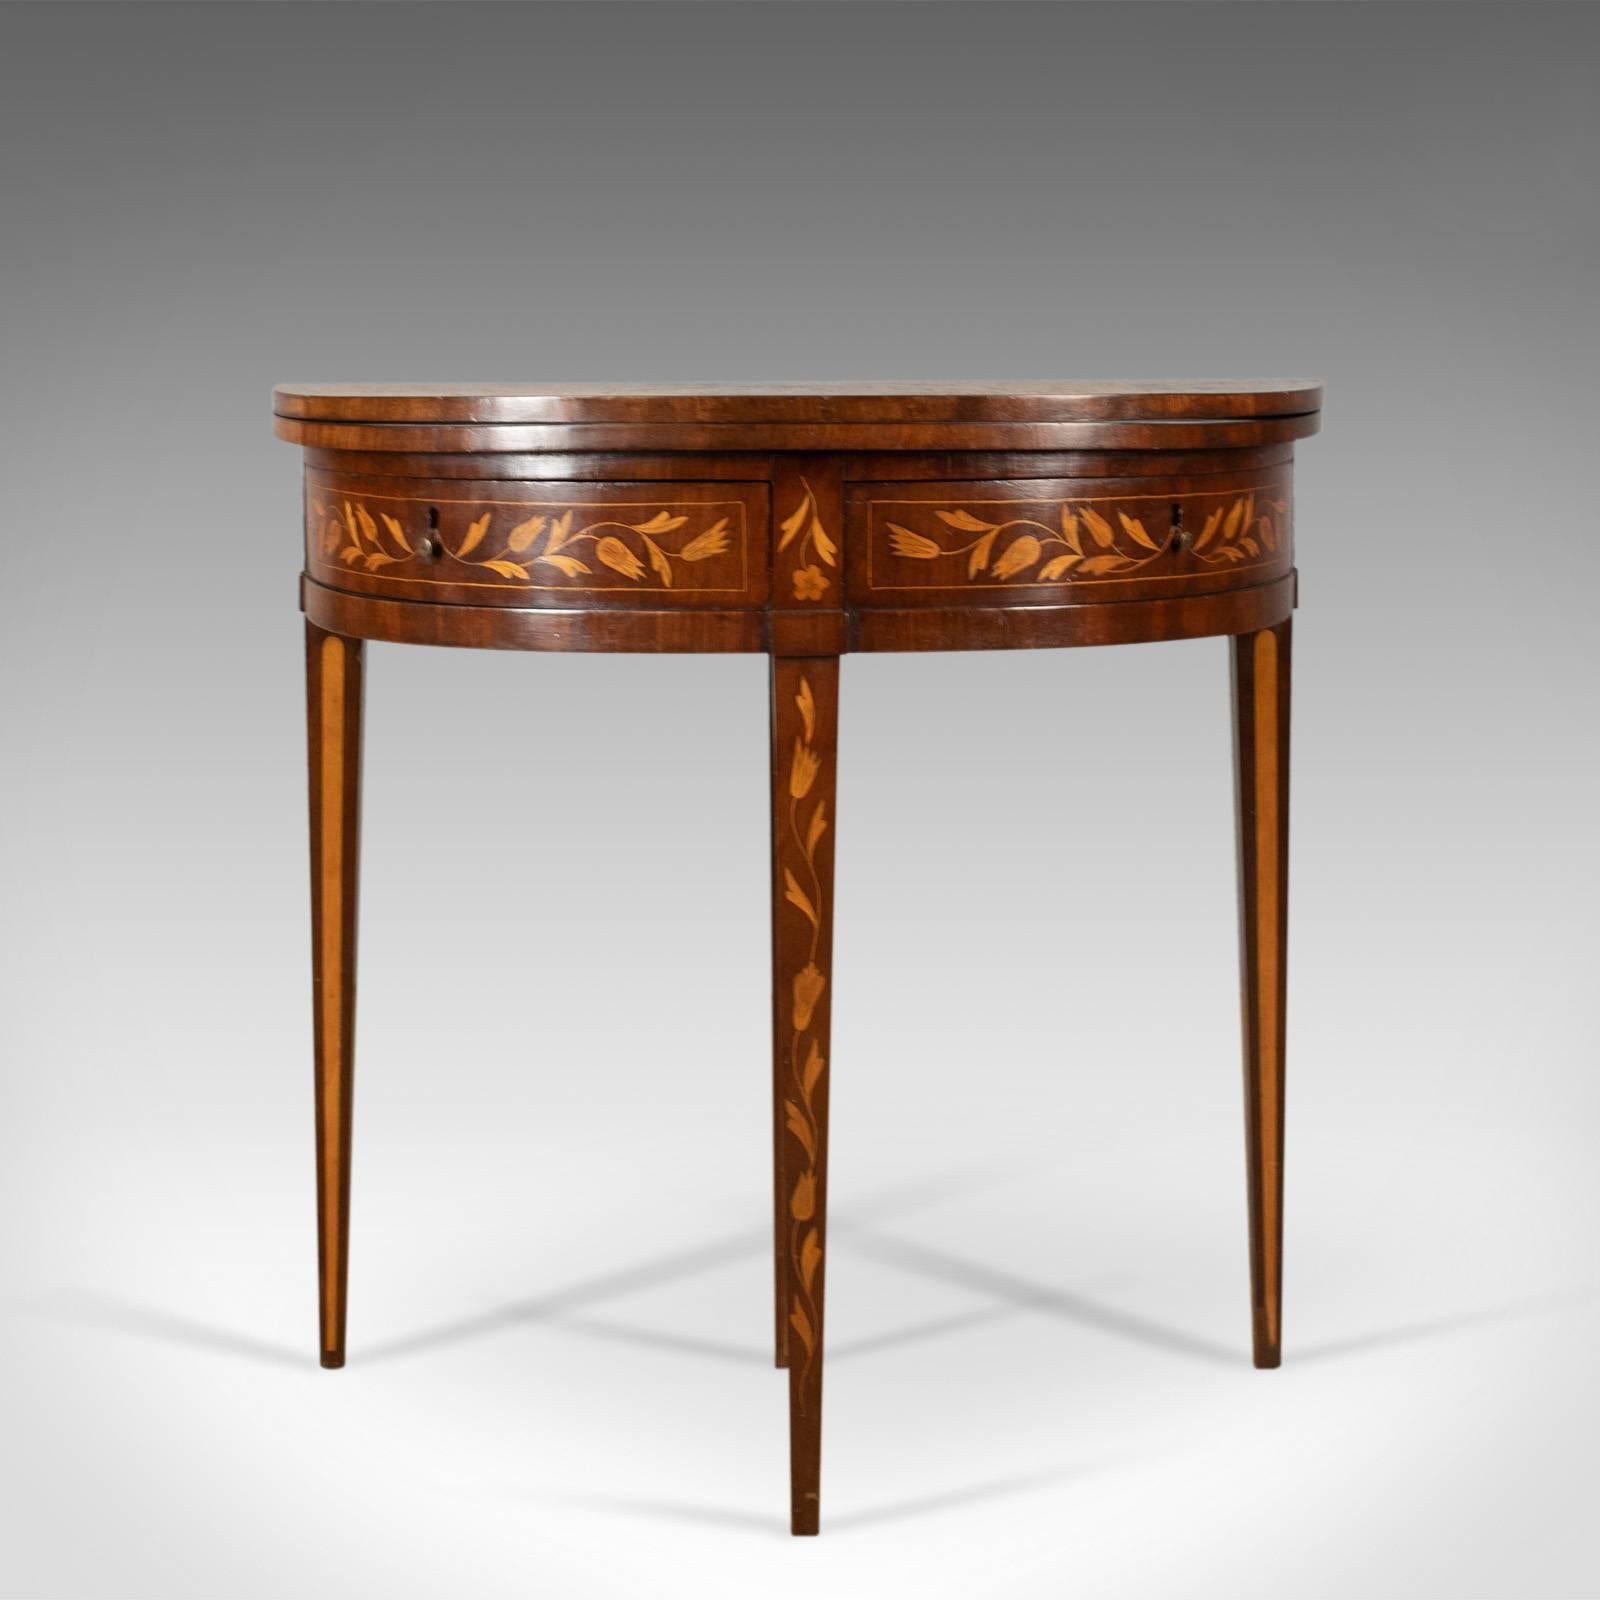 This is an antique tea table, a Dutch, fold over, inlaid, mahogany side table dating to circa 1780.

Mahogany with grain interest and good colour throughout
Desirable aged patina with a wax polished finish
Extensively decorated with well